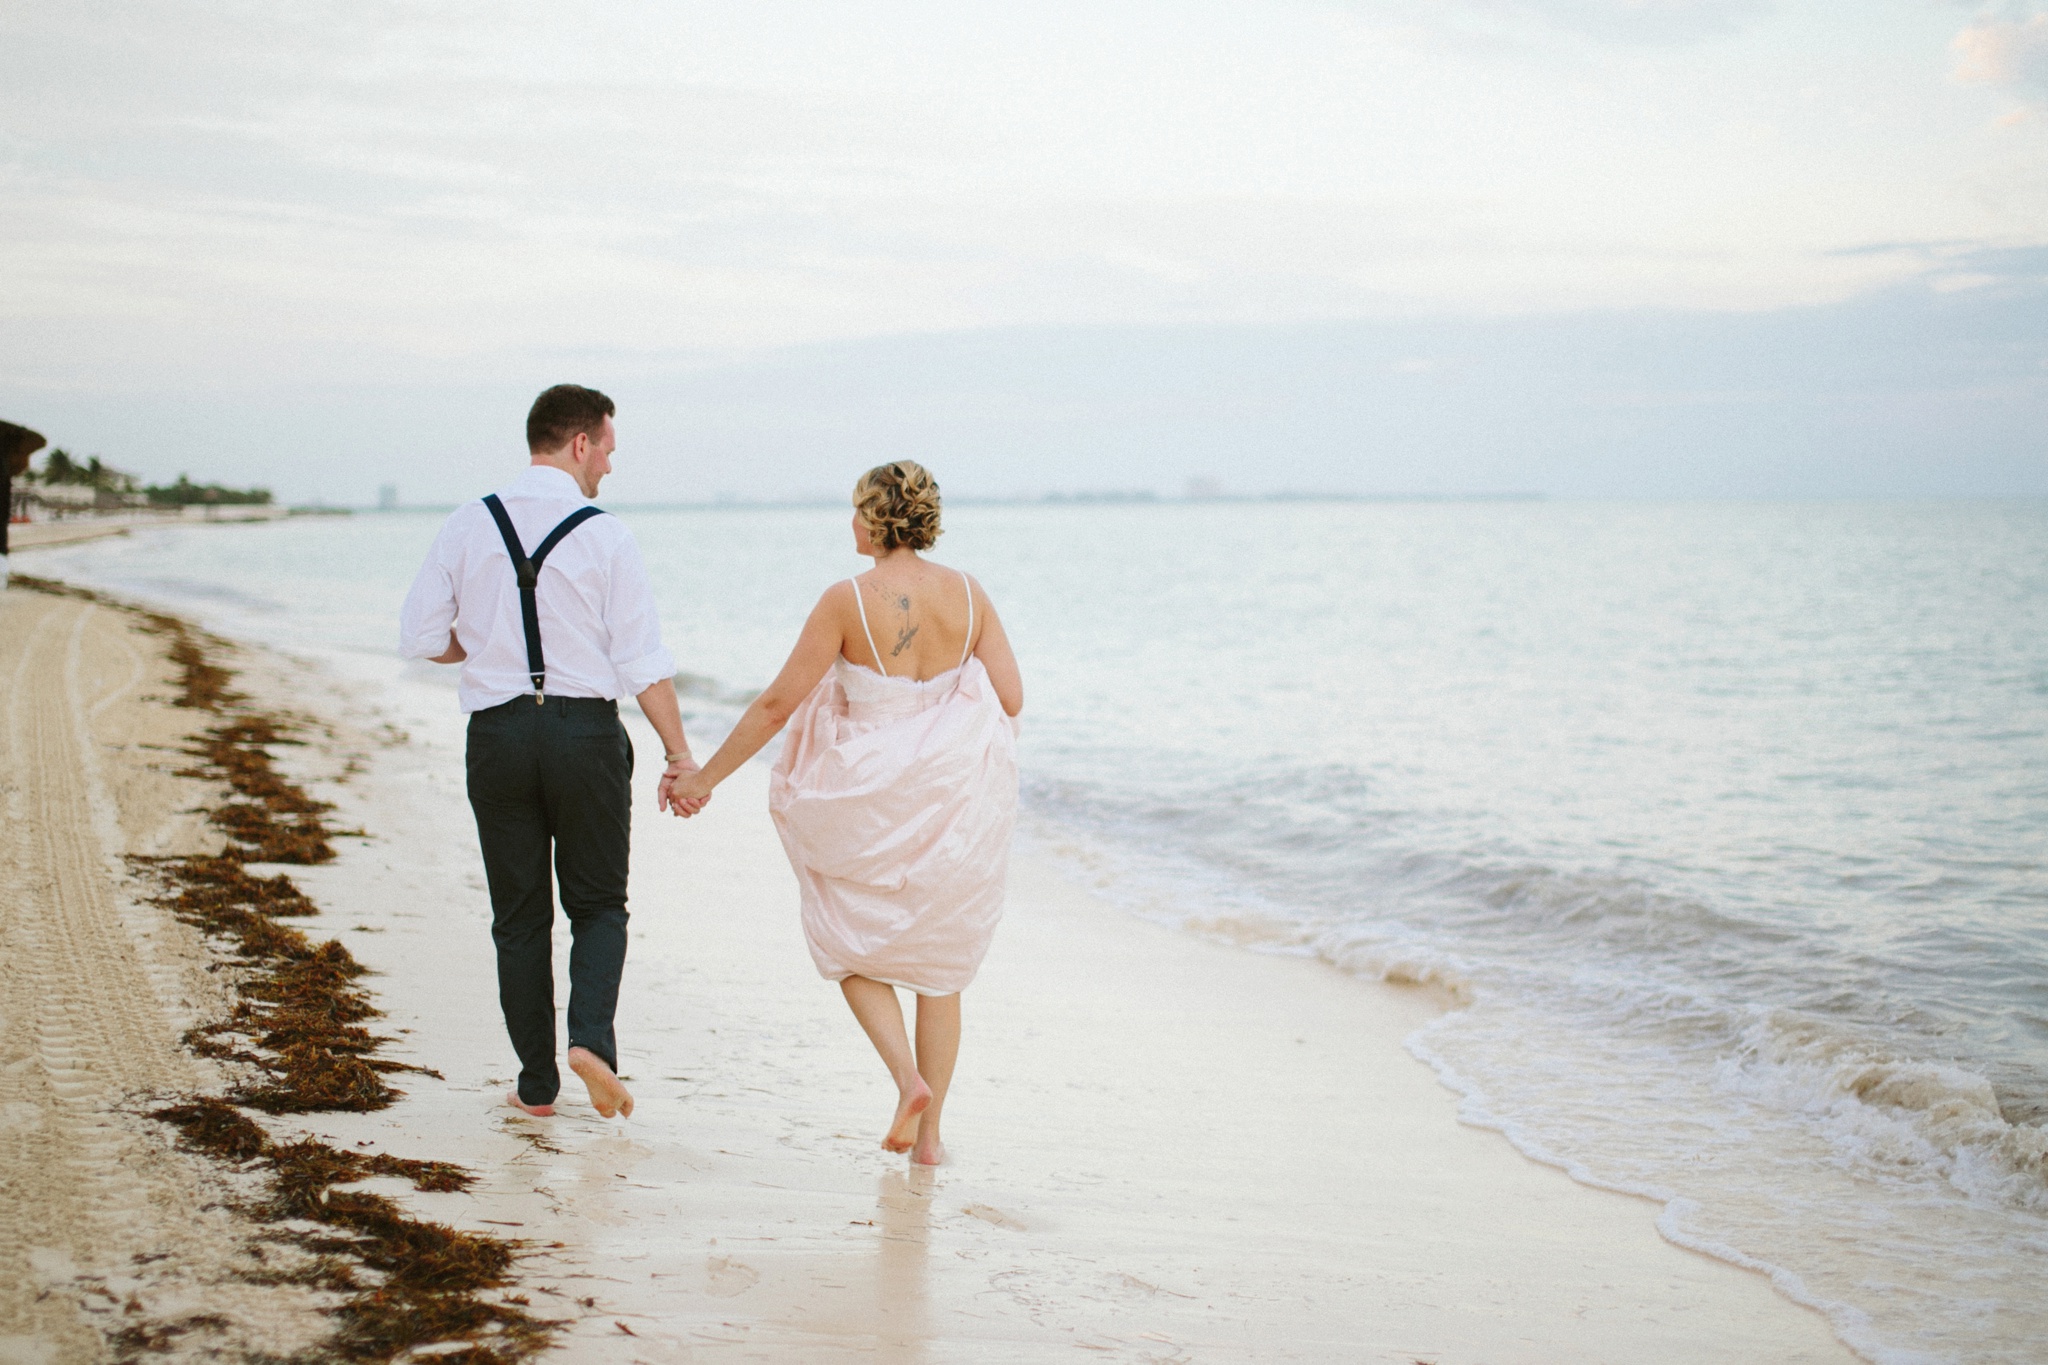 Moon Palace Resort Cancun Mexico Wedding Photos Bride and Groom Holding Hands Walking on the Beach